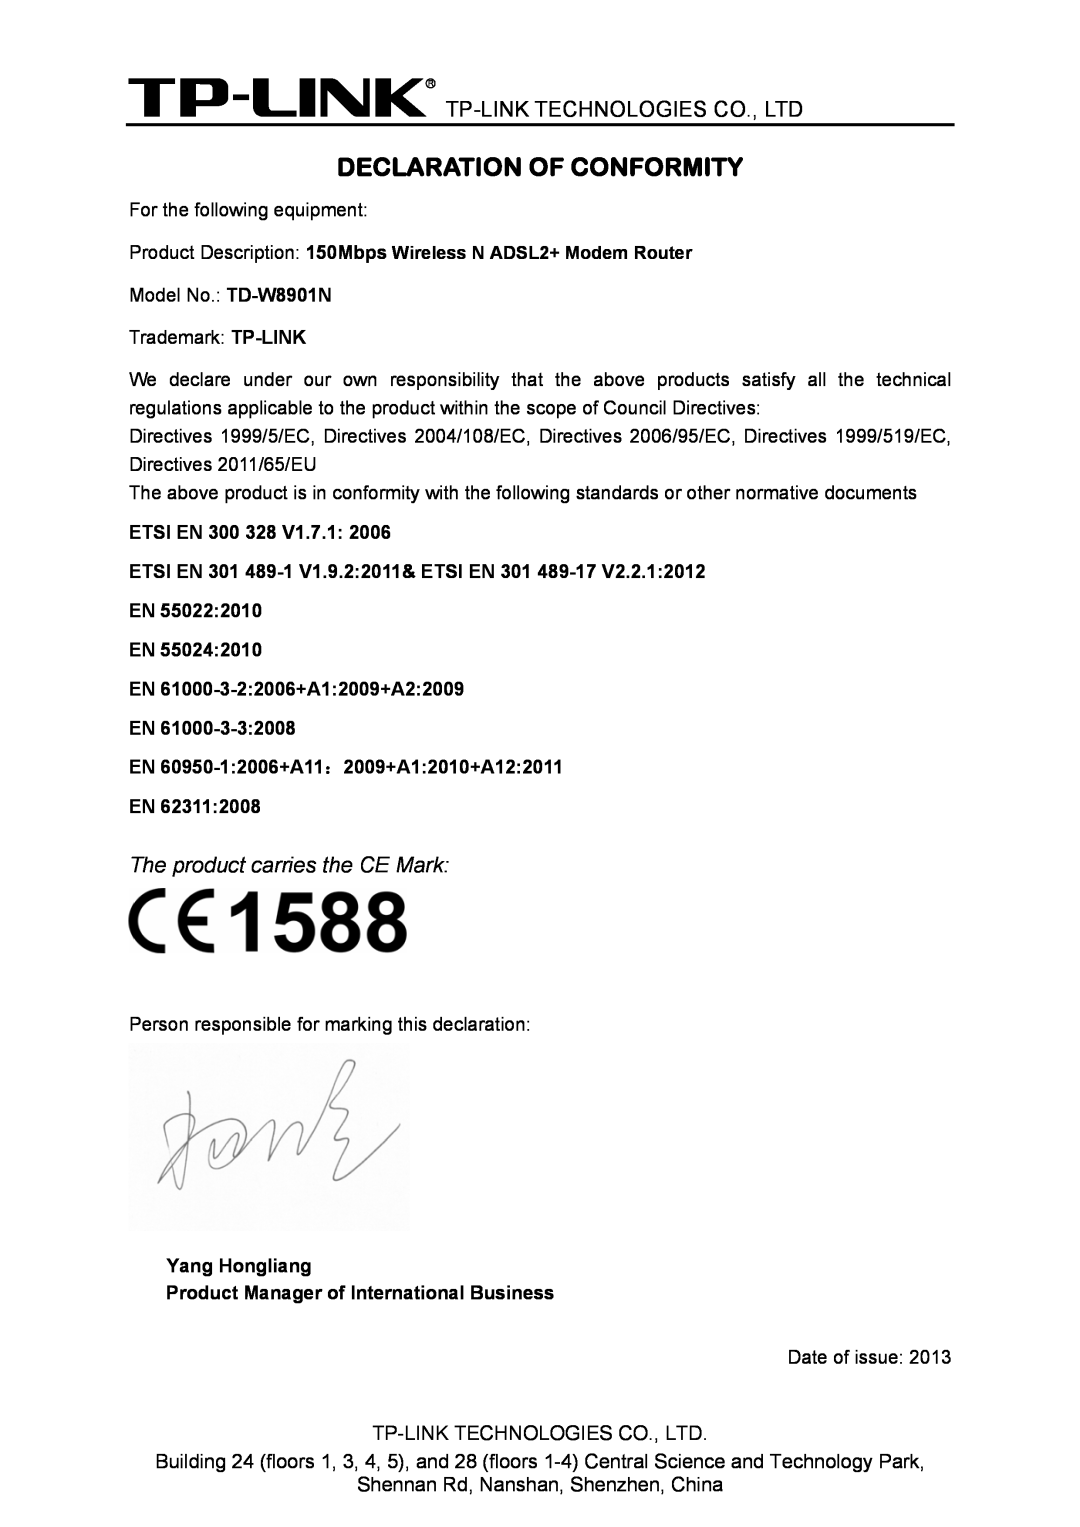 TP-Link TD-W8901N manual Declaration Of Conformity, The product carries the CE Mark, Shennan Rd, Nanshan, Shenzhen, China 